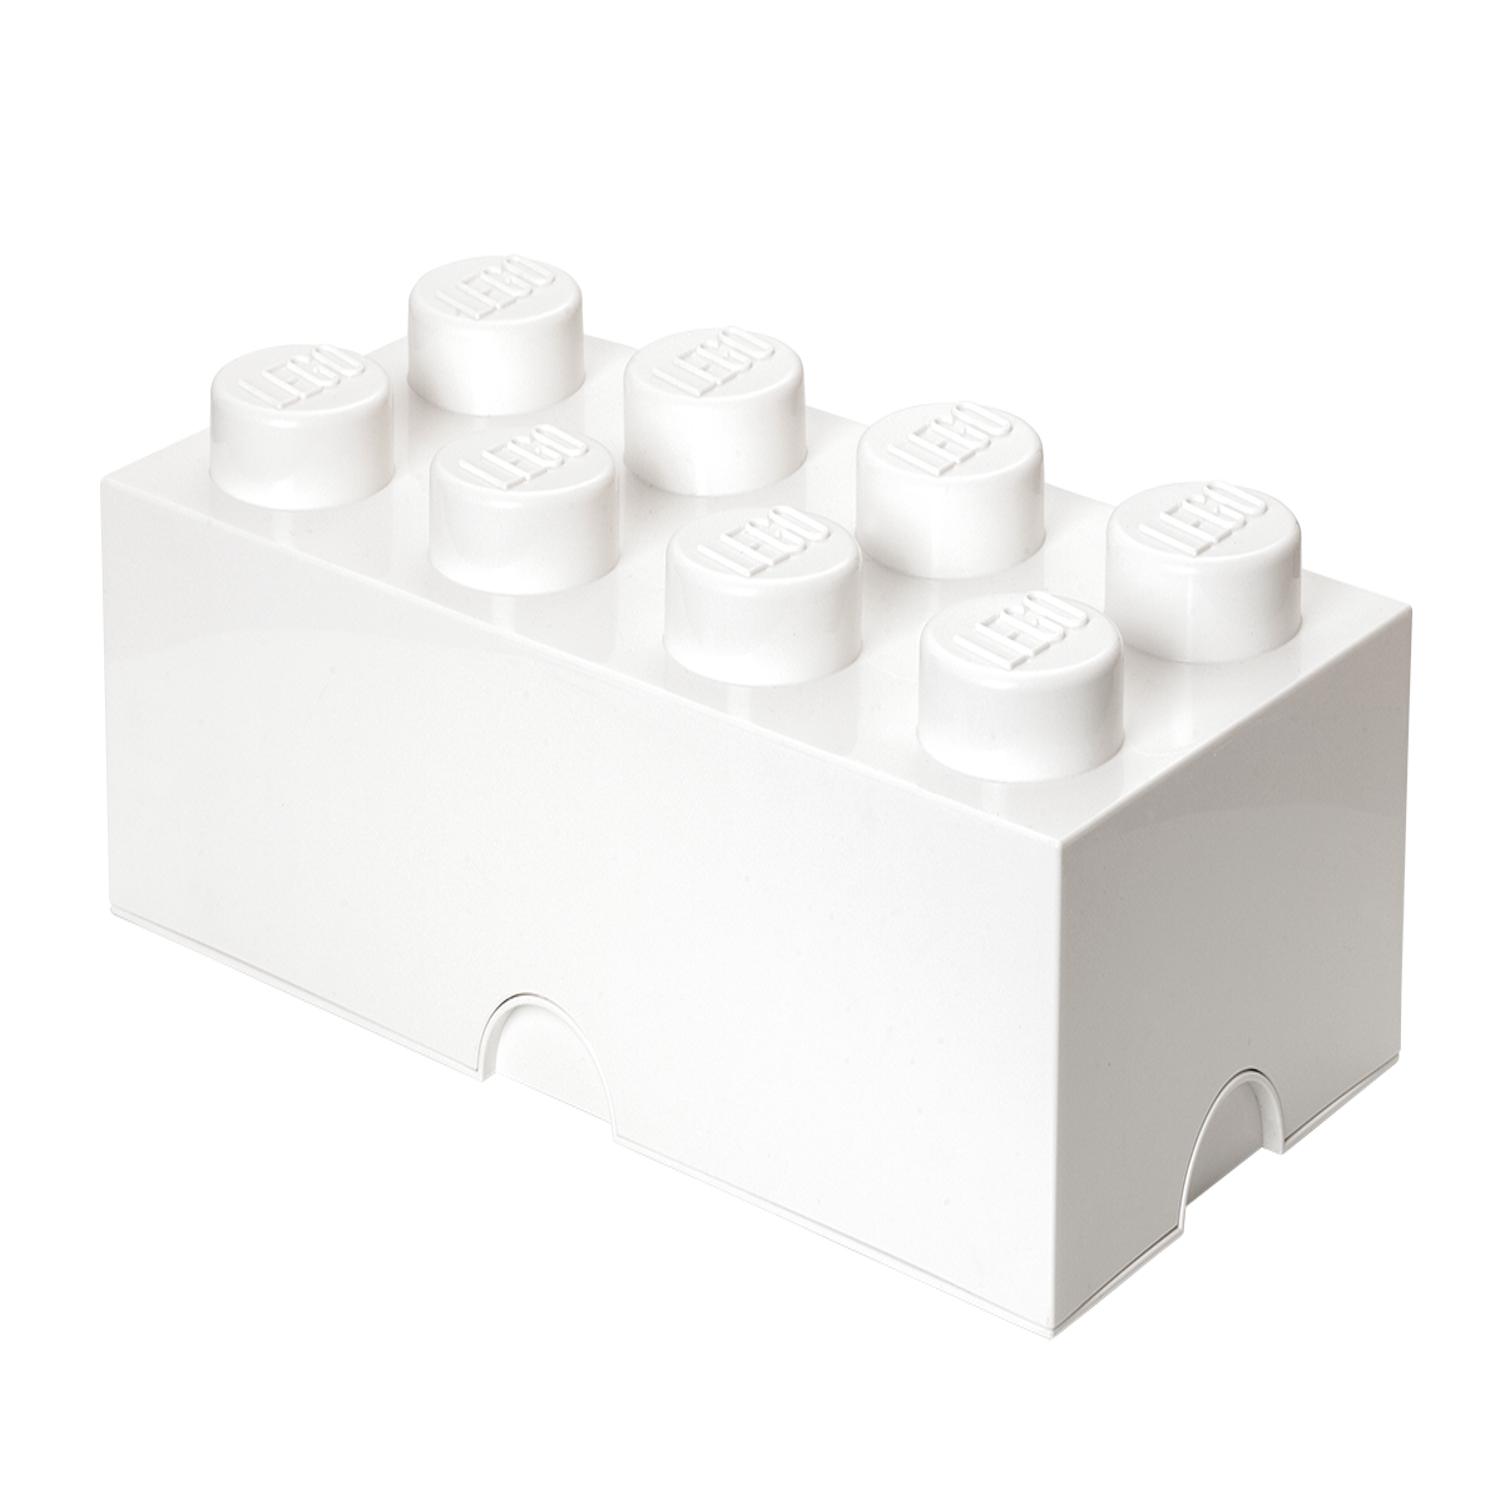 Smeltend Plateau struik 8-Stud Storage Brick – White 5006913 | Other | Buy online at the Official  LEGO® Shop US